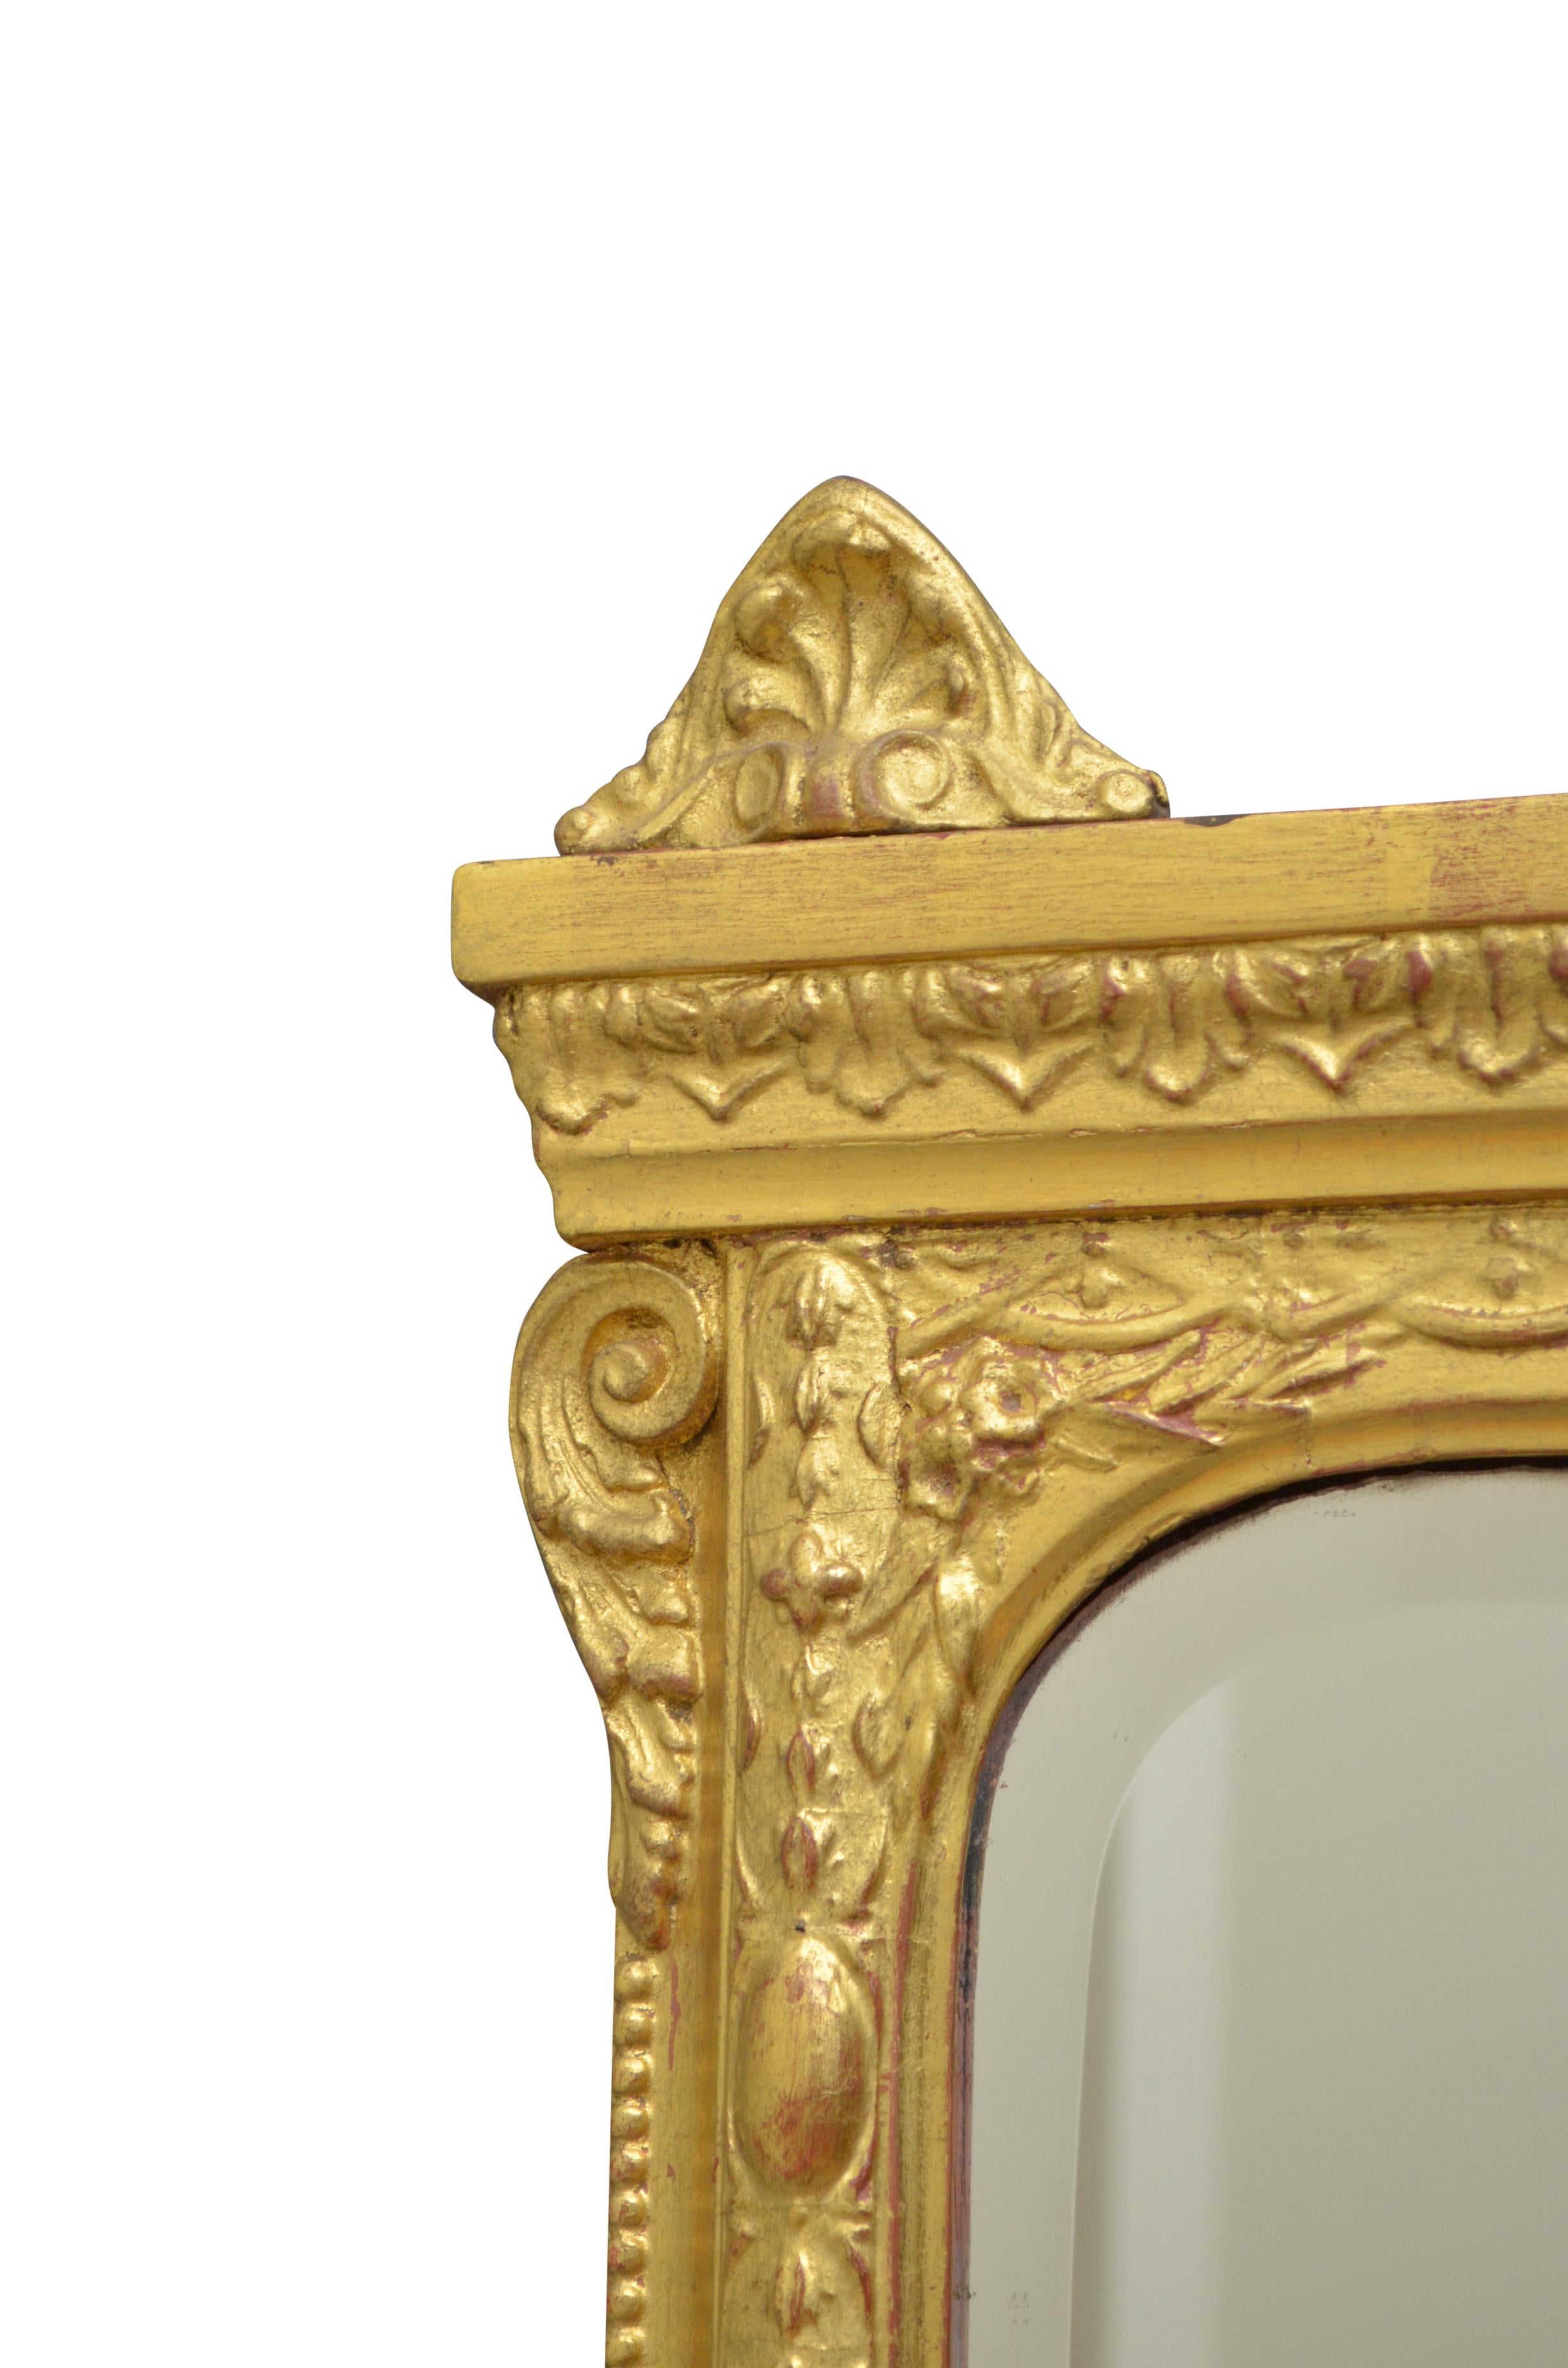 Giltwood Mantel Mirror In Excellent Condition For Sale In Whaley Bridge, GB